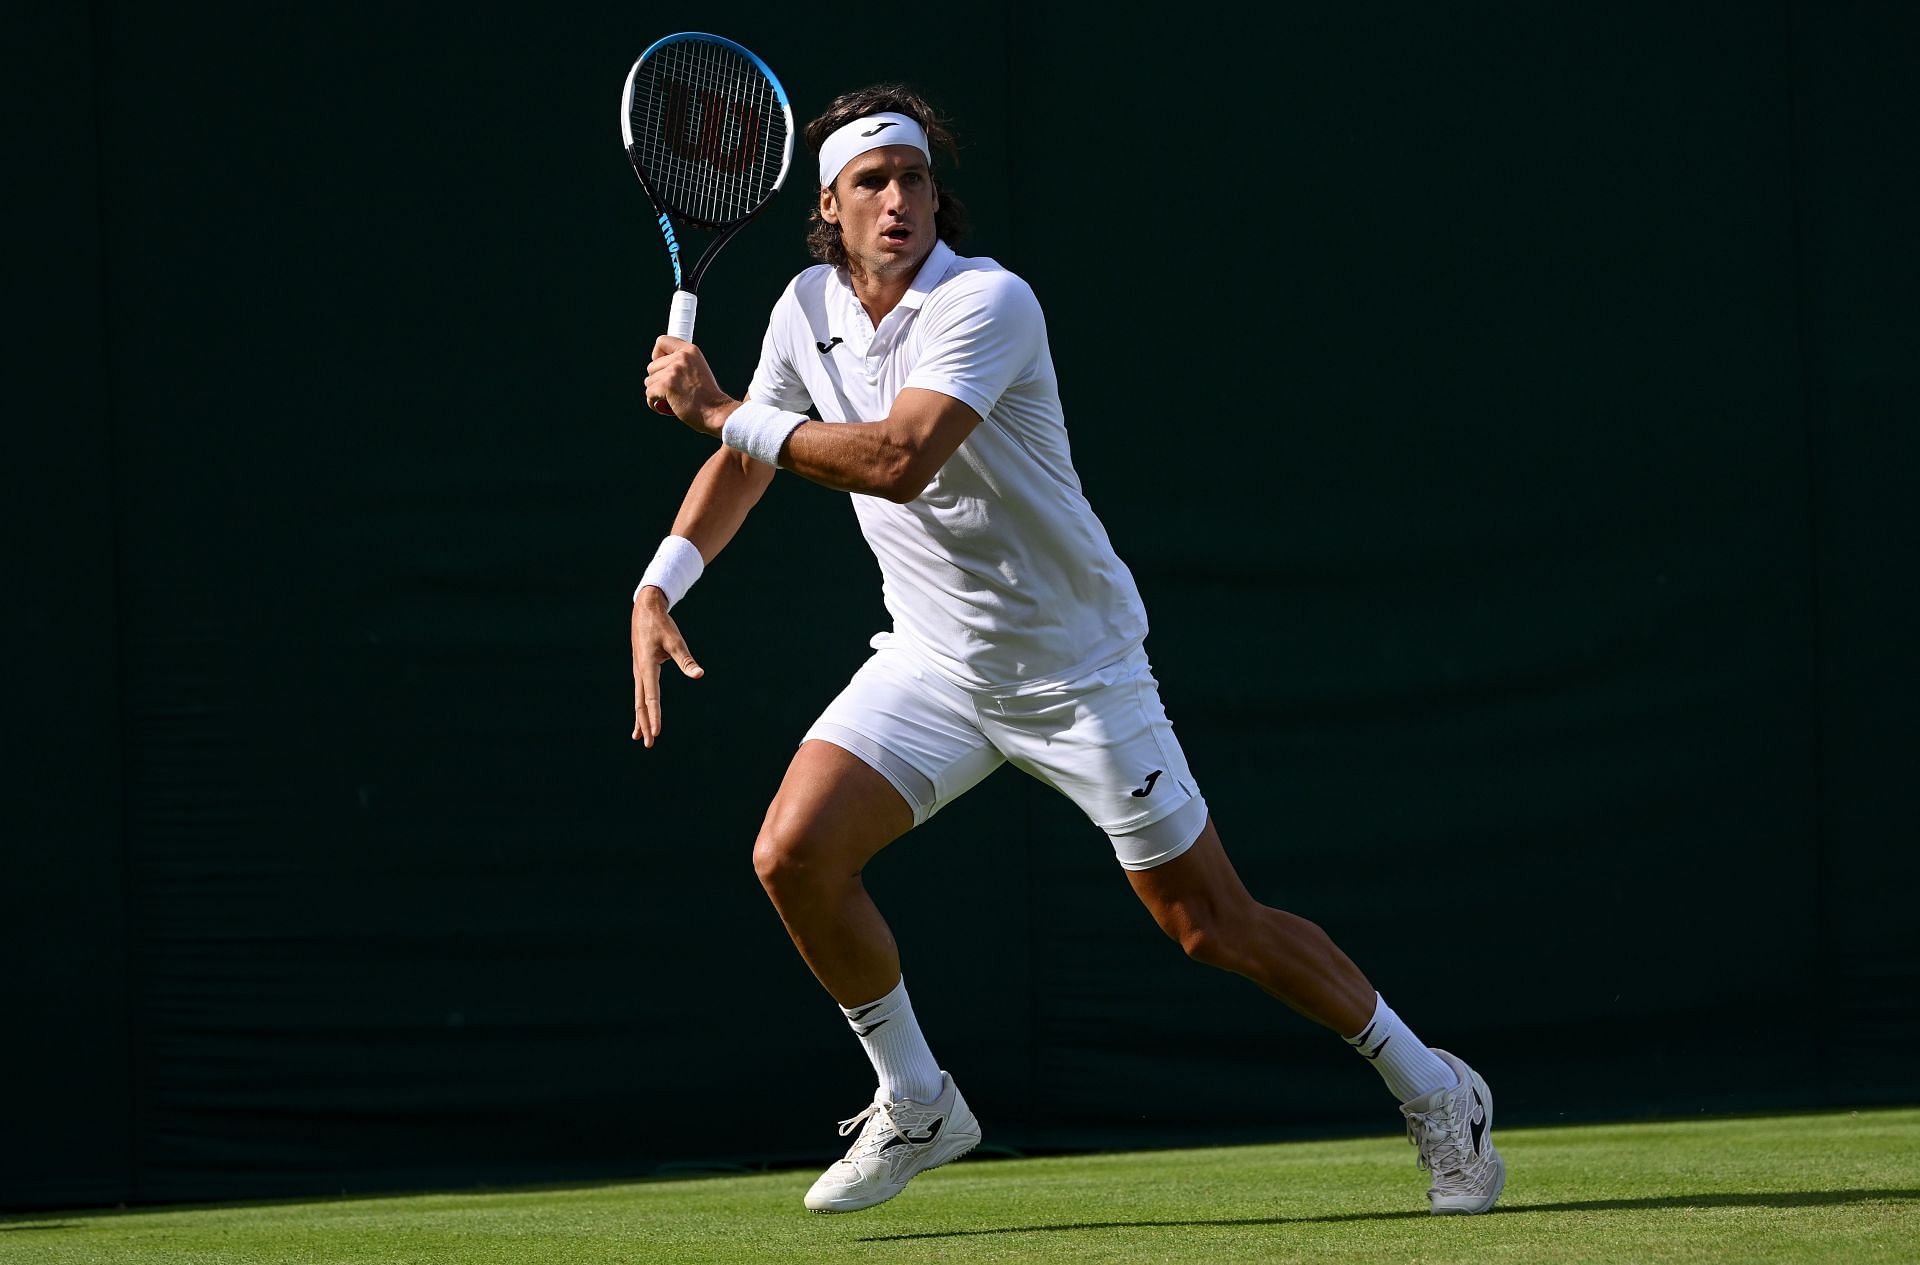 Feliciano Lopez at The Championships - Wimbledon 2022 - Day 2